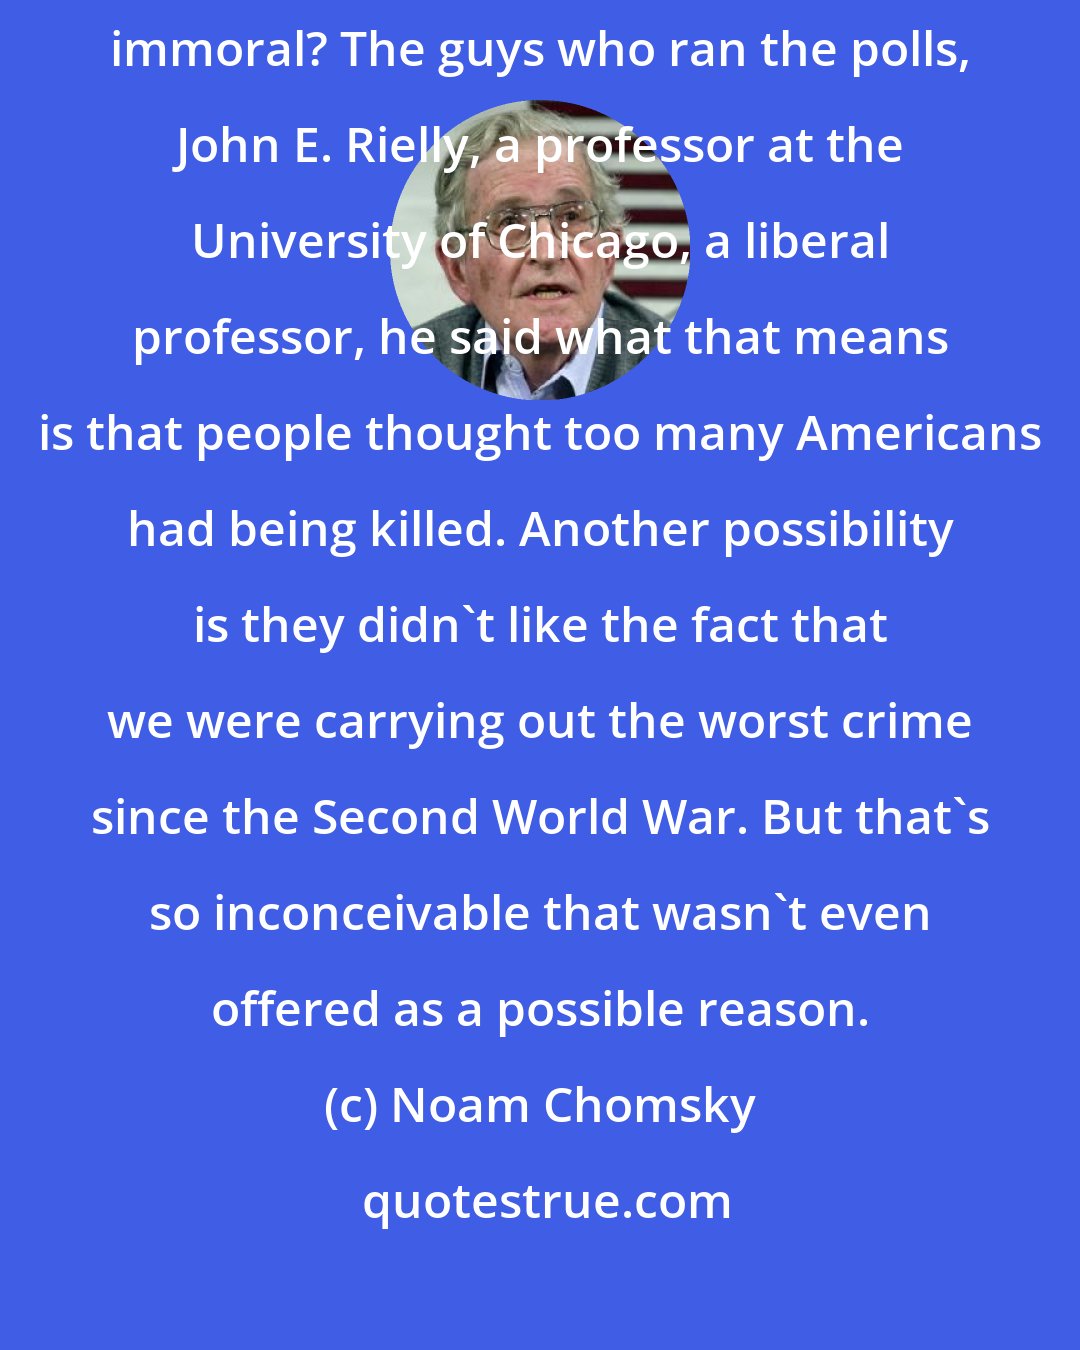 Noam Chomsky: Why did the people think [Vietnam war] was fundamentally wrong and immoral? The guys who ran the polls, John E. Rielly, a professor at the University of Chicago, a liberal professor, he said what that means is that people thought too many Americans had being killed. Another possibility is they didn't like the fact that we were carrying out the worst crime since the Second World War. But that's so inconceivable that wasn't even offered as a possible reason.